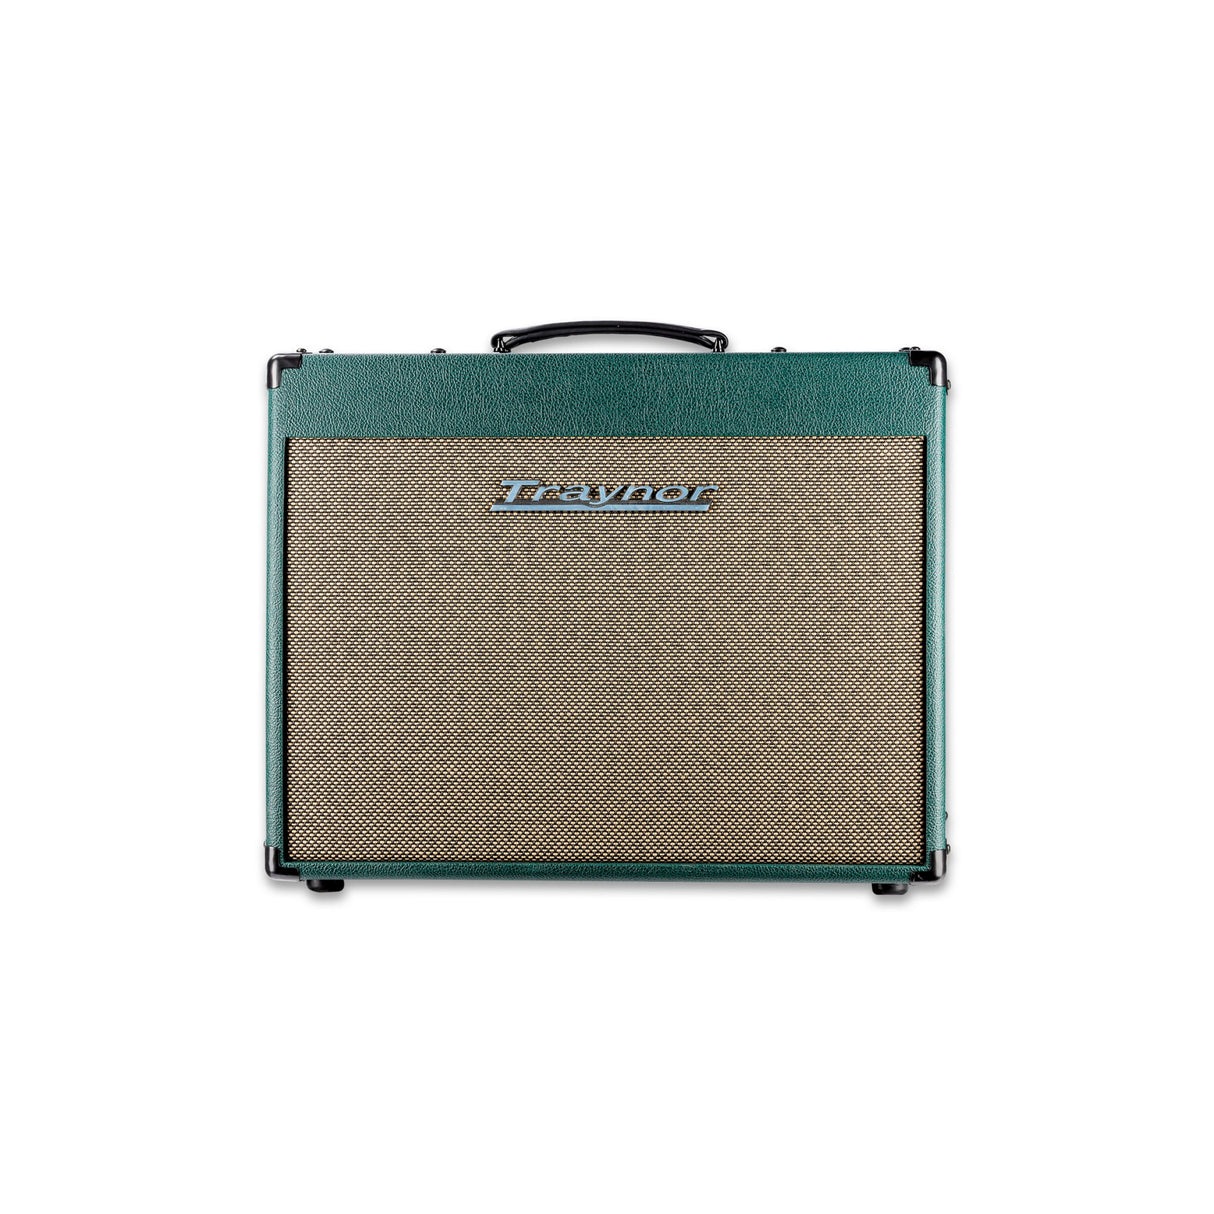 Traynor YCV4050 20th Anniversary 40W 12-Inch Tube Guitar Combo Amplifier